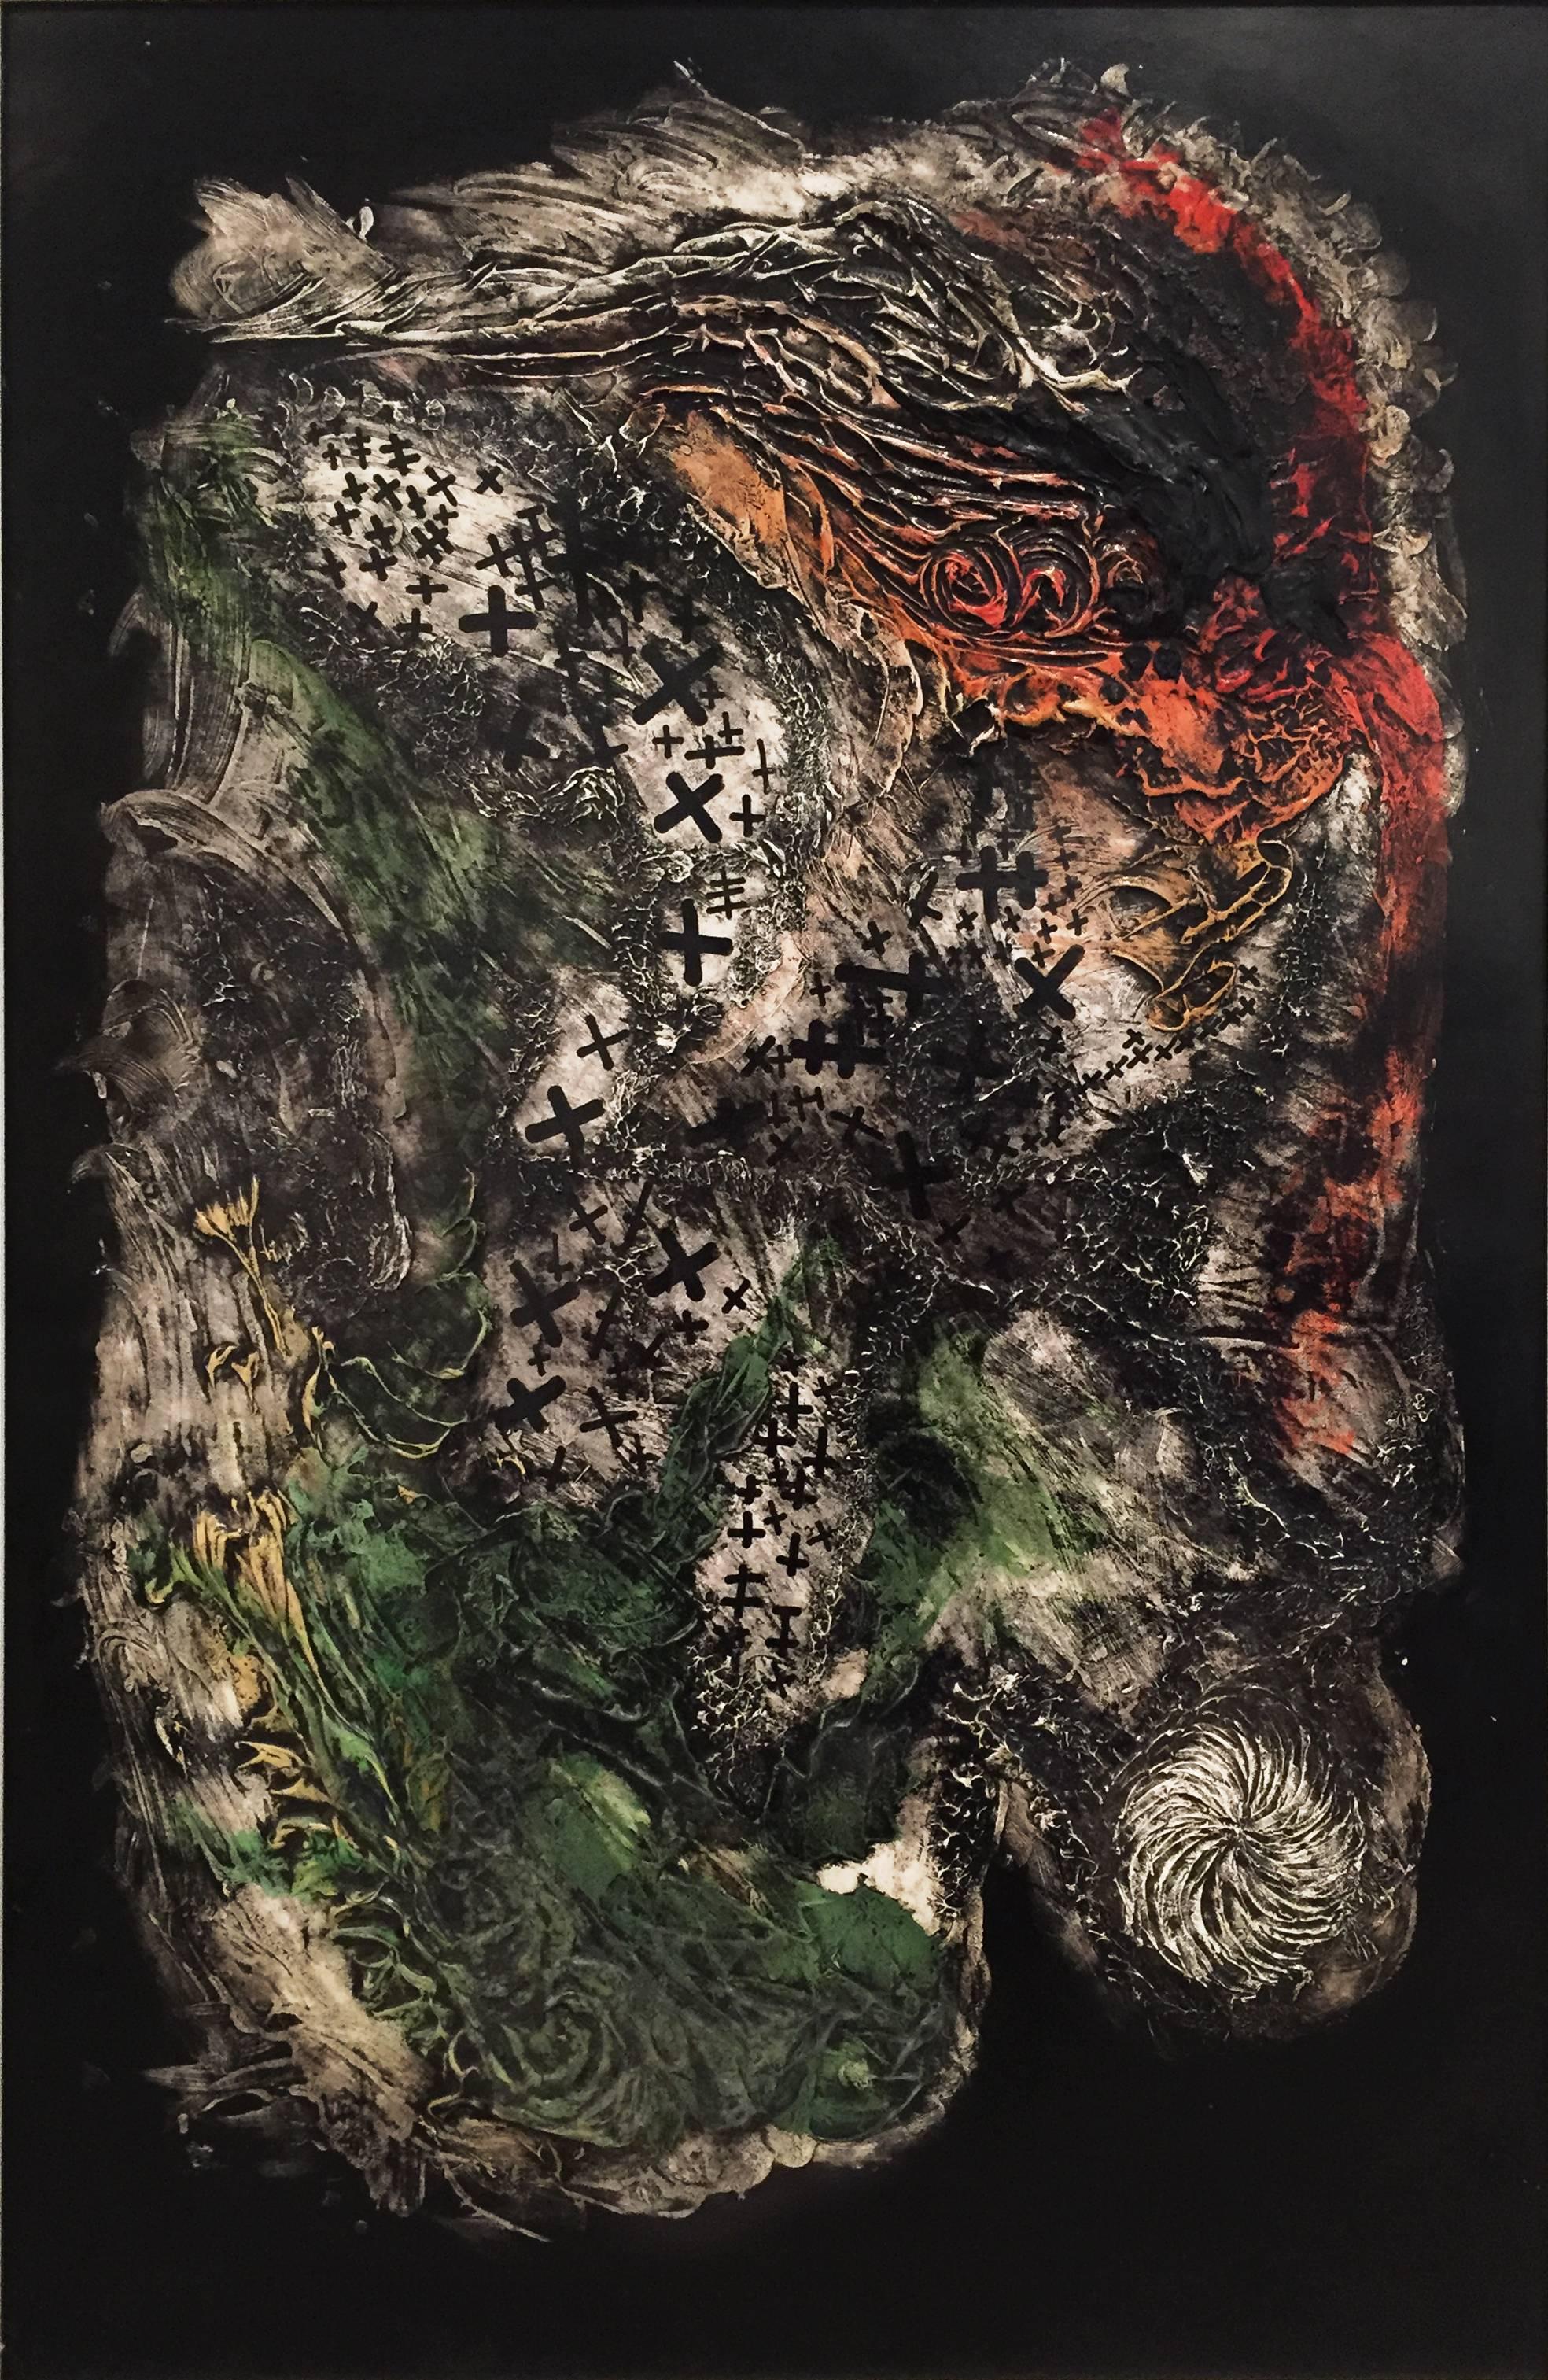 Jorge Piqueras (1925) Composition, circa 1960, oil and mixed media on panel.

SIZE: cm. 70.5 x 46 x 1
SIZE WITH FRAME: cm. 72.5 x 48 x 1

Certificate of Authenticity:
Galleria Michelangelo

Provenance:
Lorenzelli Gallery, Bergamo, Italy

Jorge